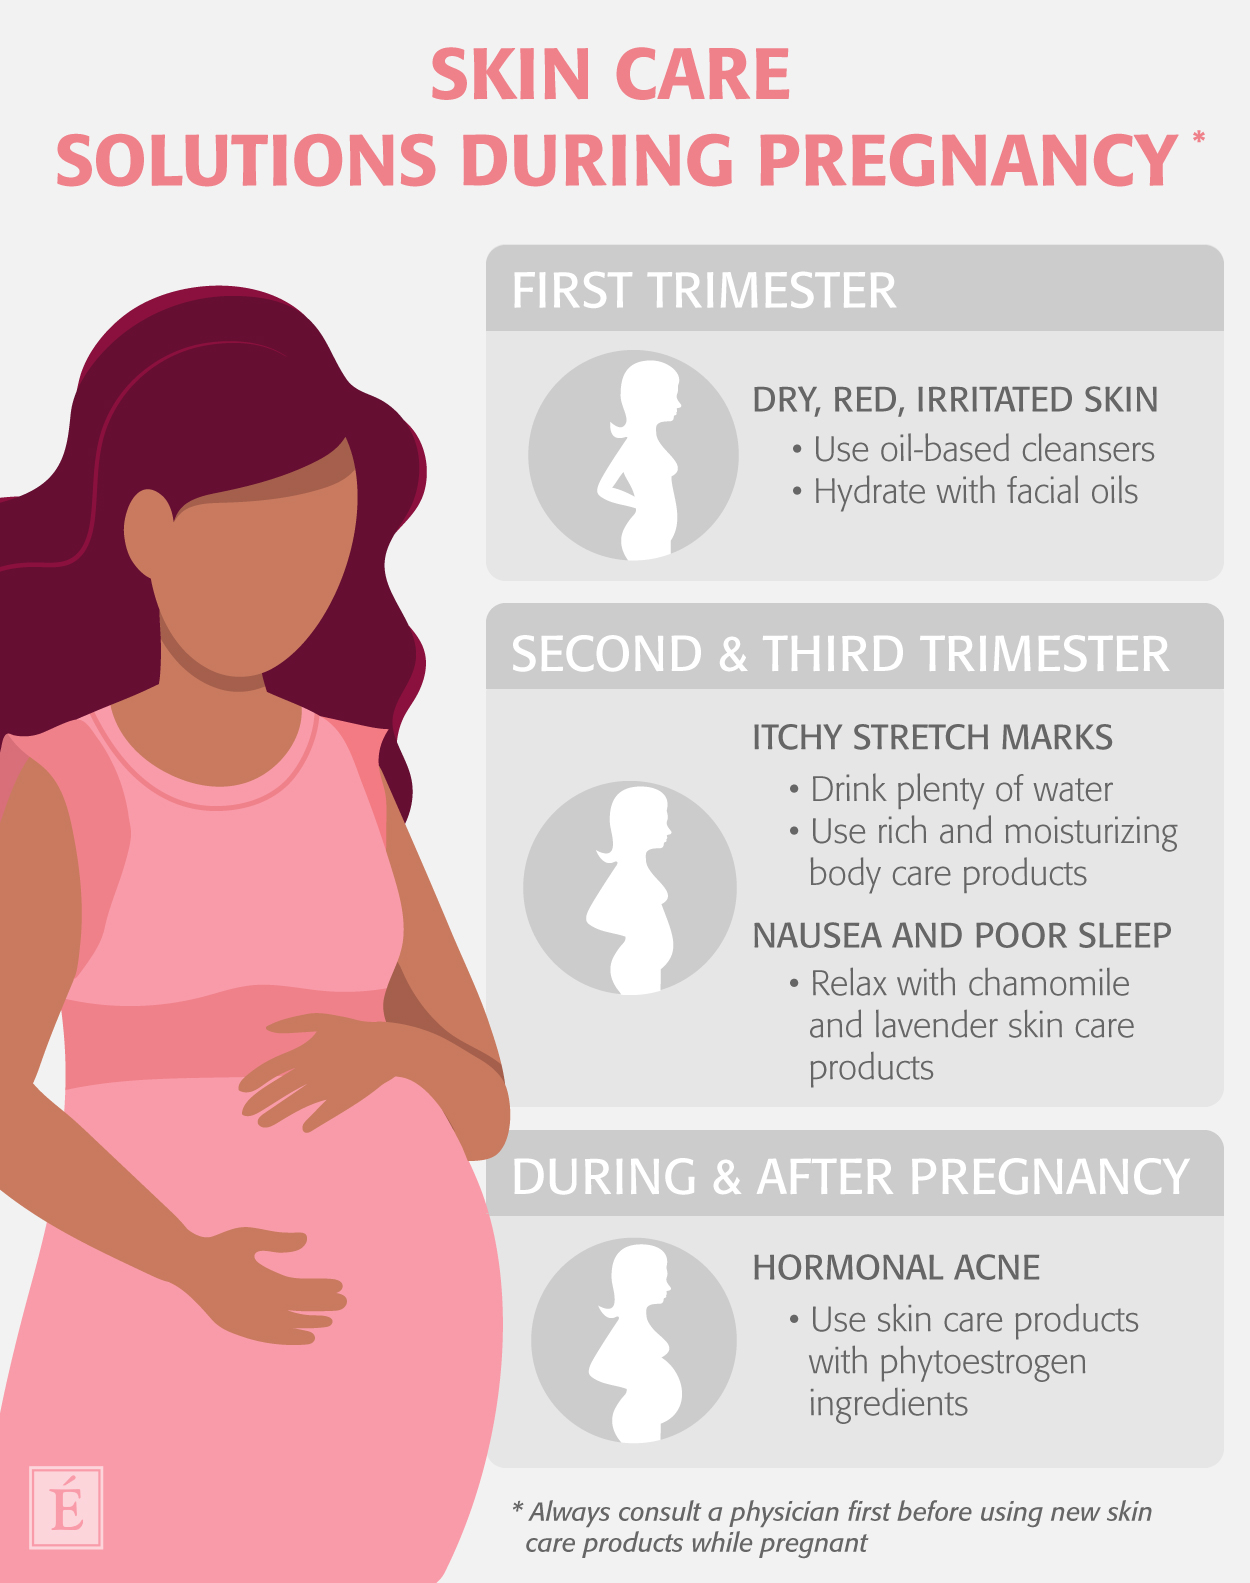 Skin Care Solutions For Pregnancy Infogrpahic